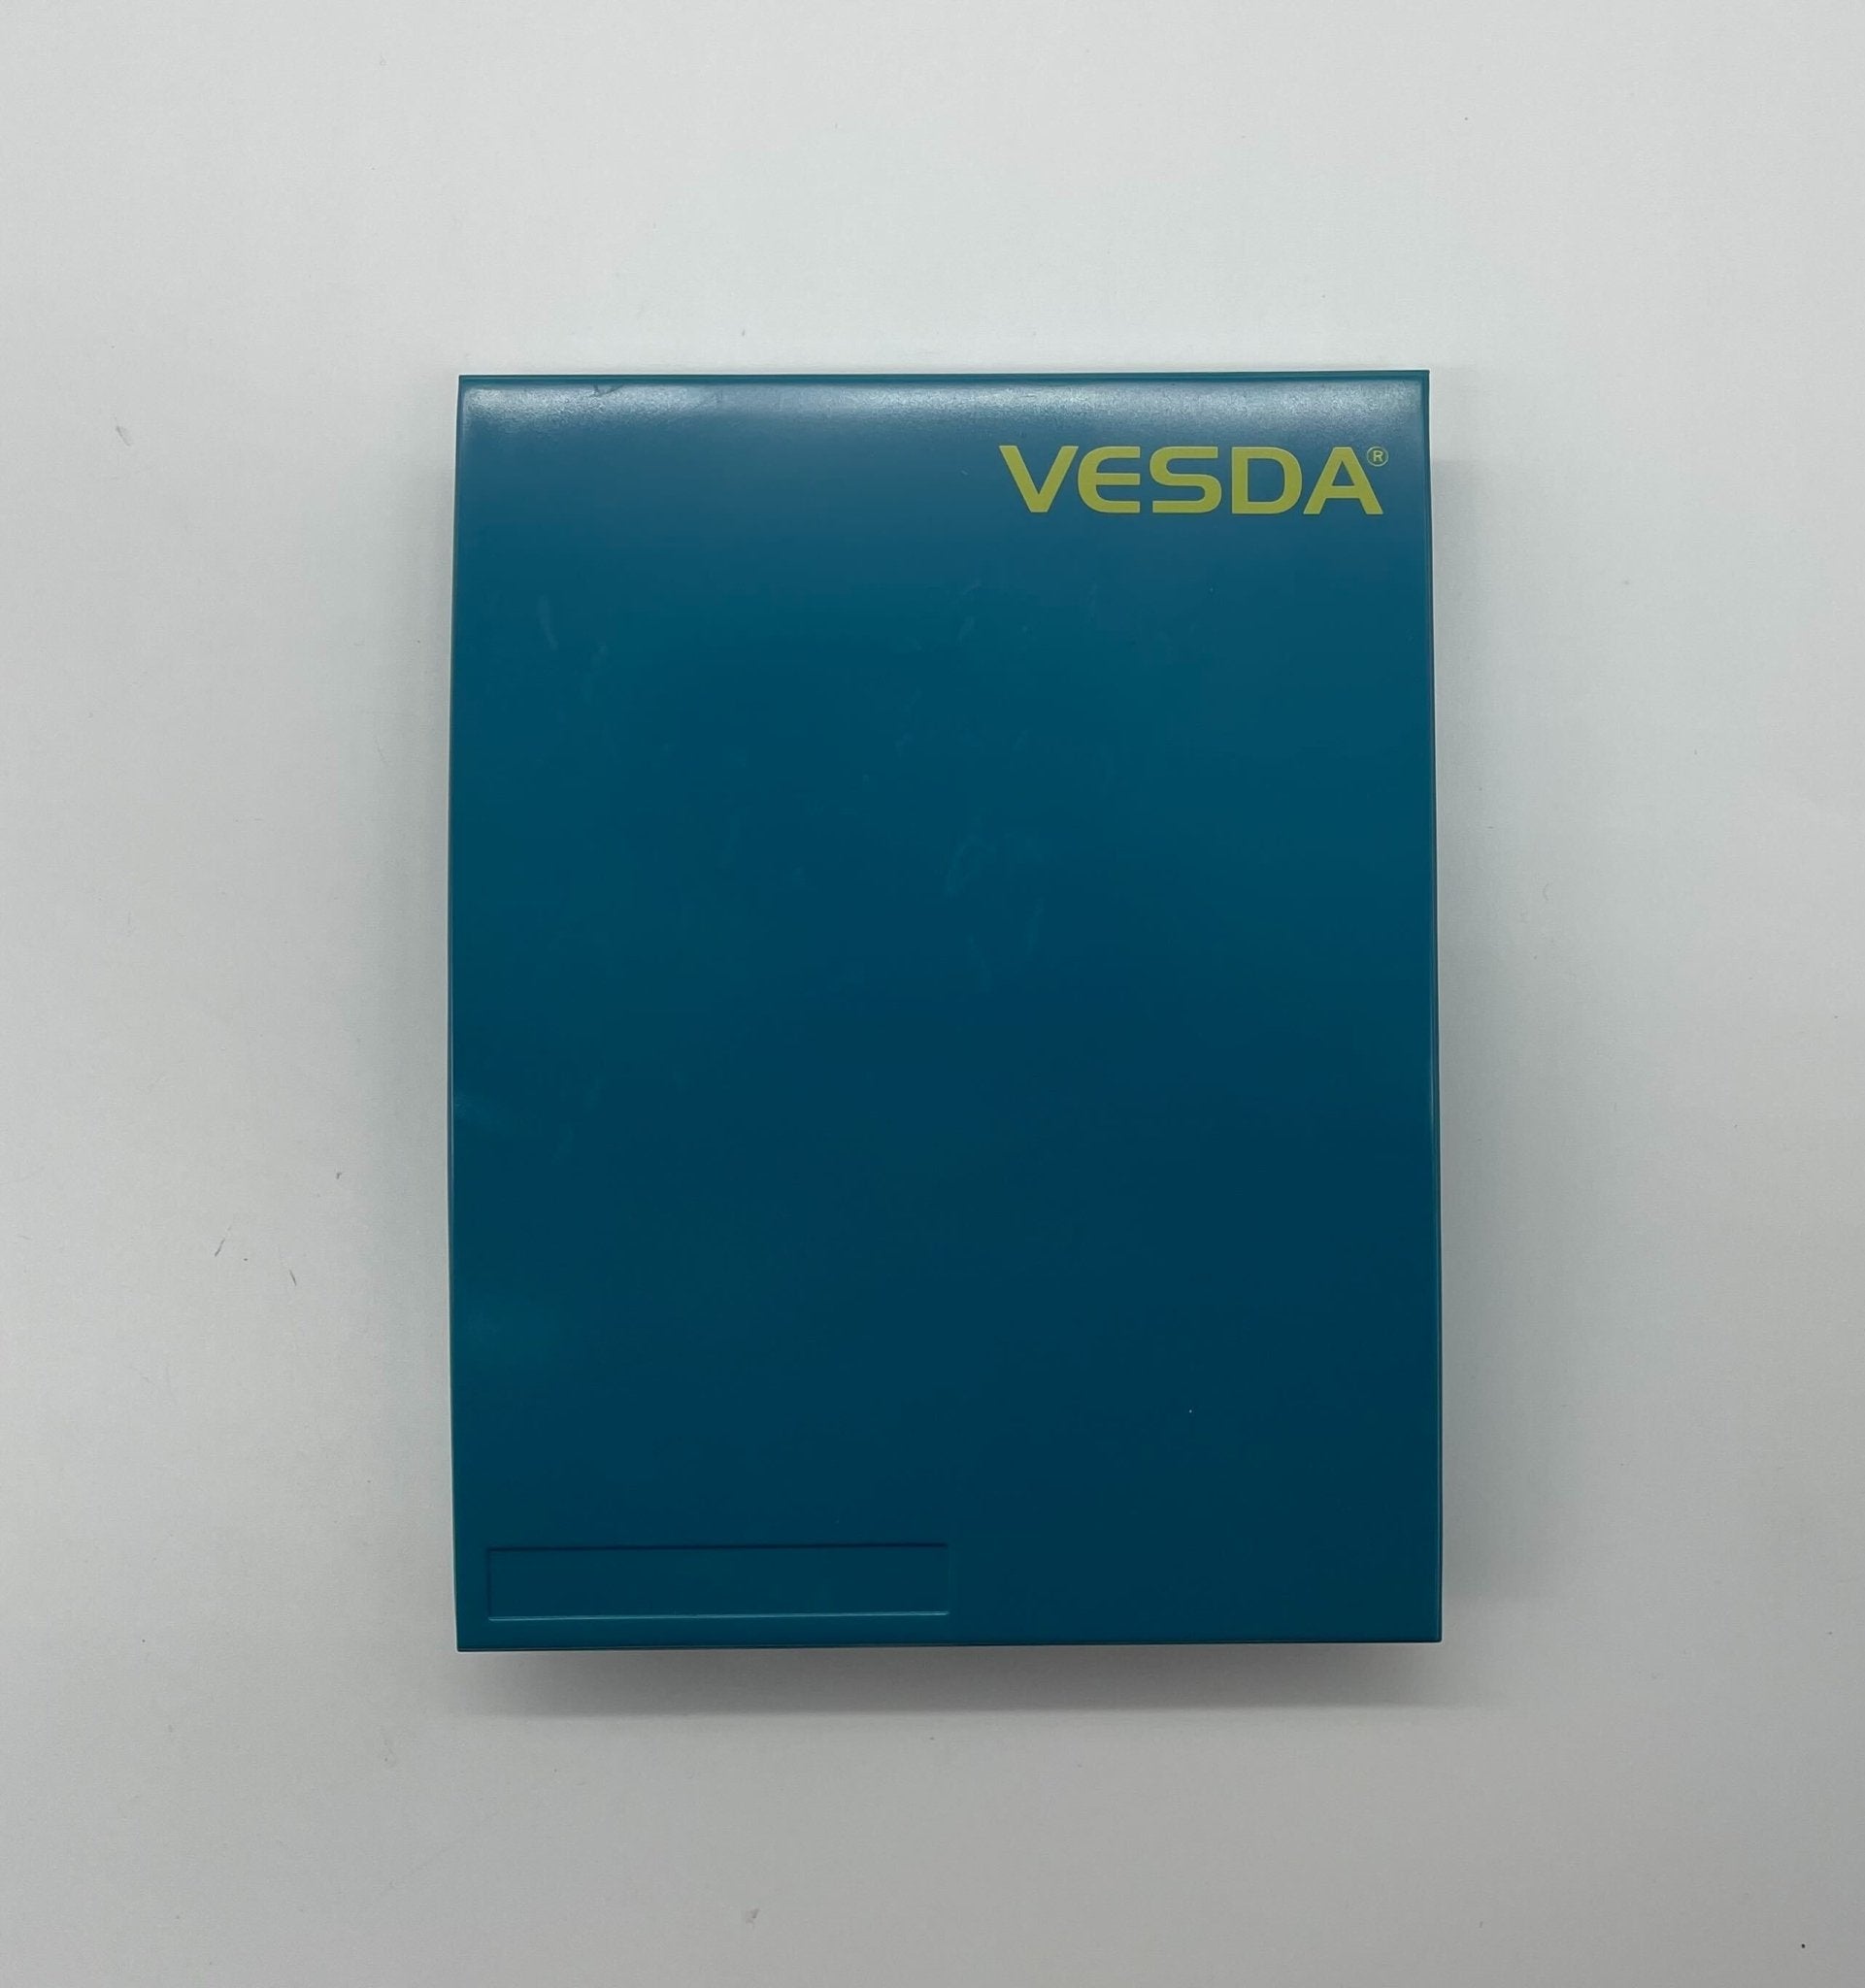 Vesda VSP-000 Blank Plate With Logo - The Fire Alarm Supplier